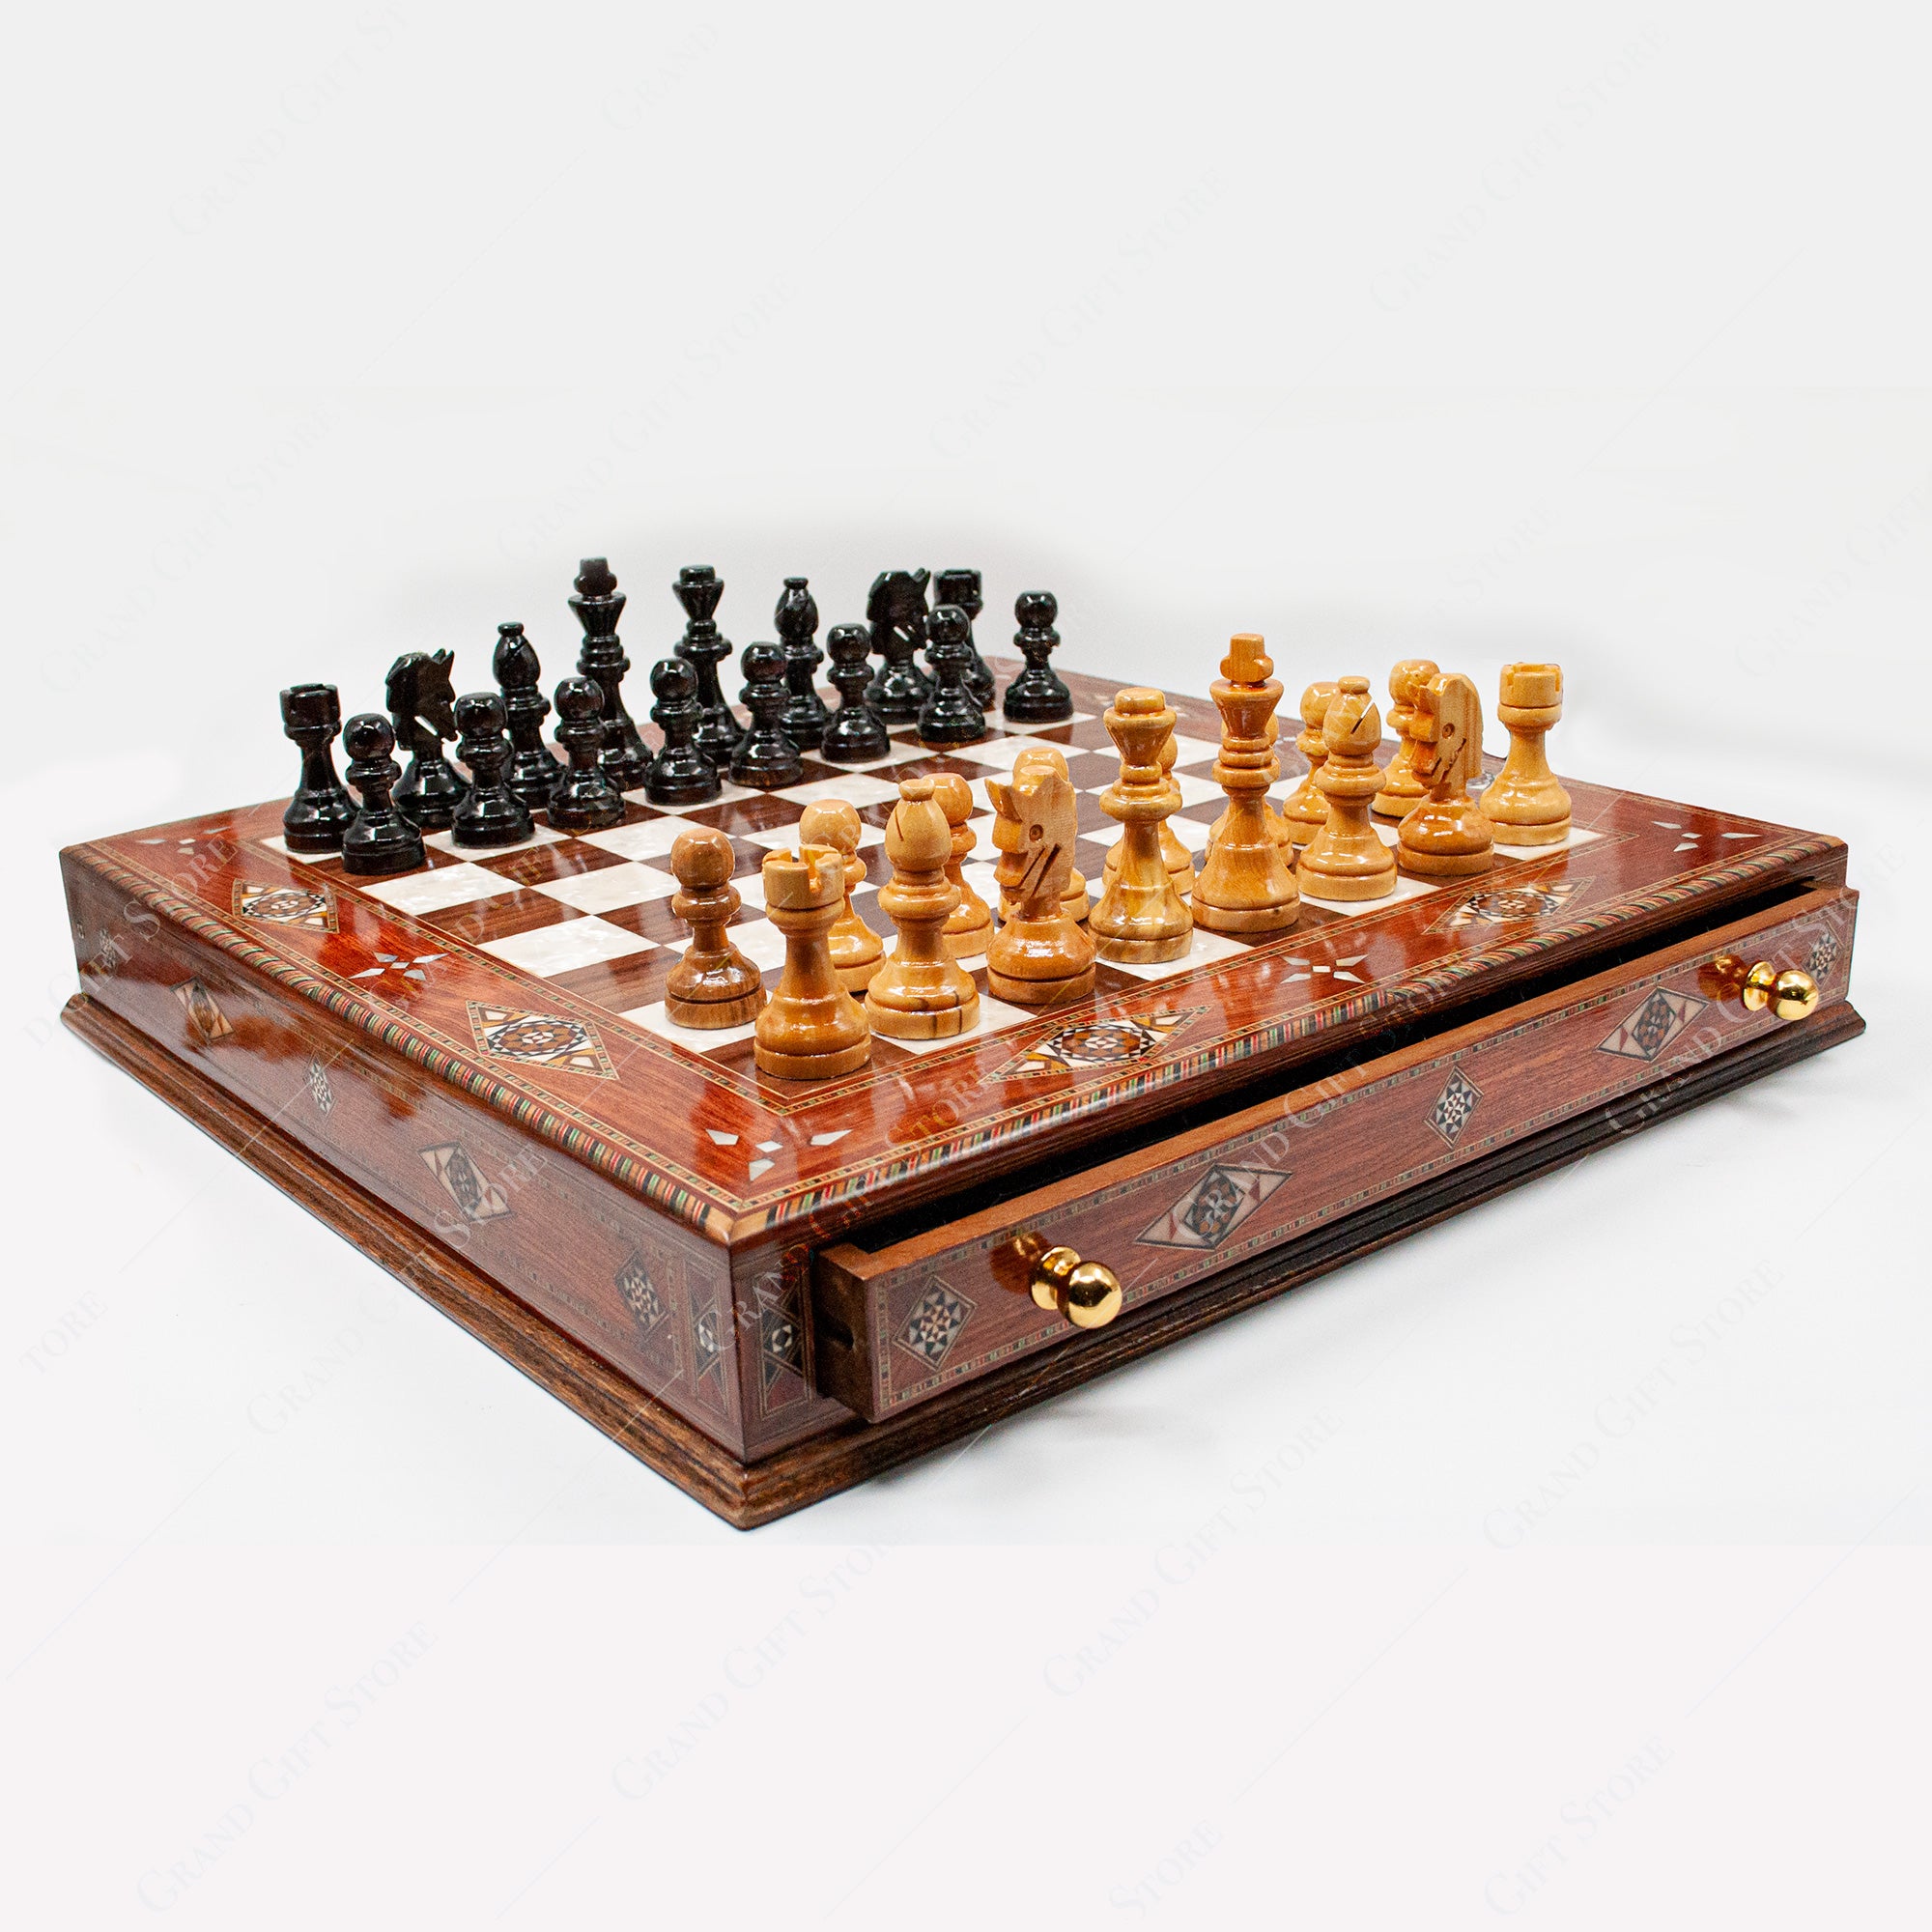 HANDMADE WOODEN CHESS SET WITH BOARD AND STORAGE DRAWERS